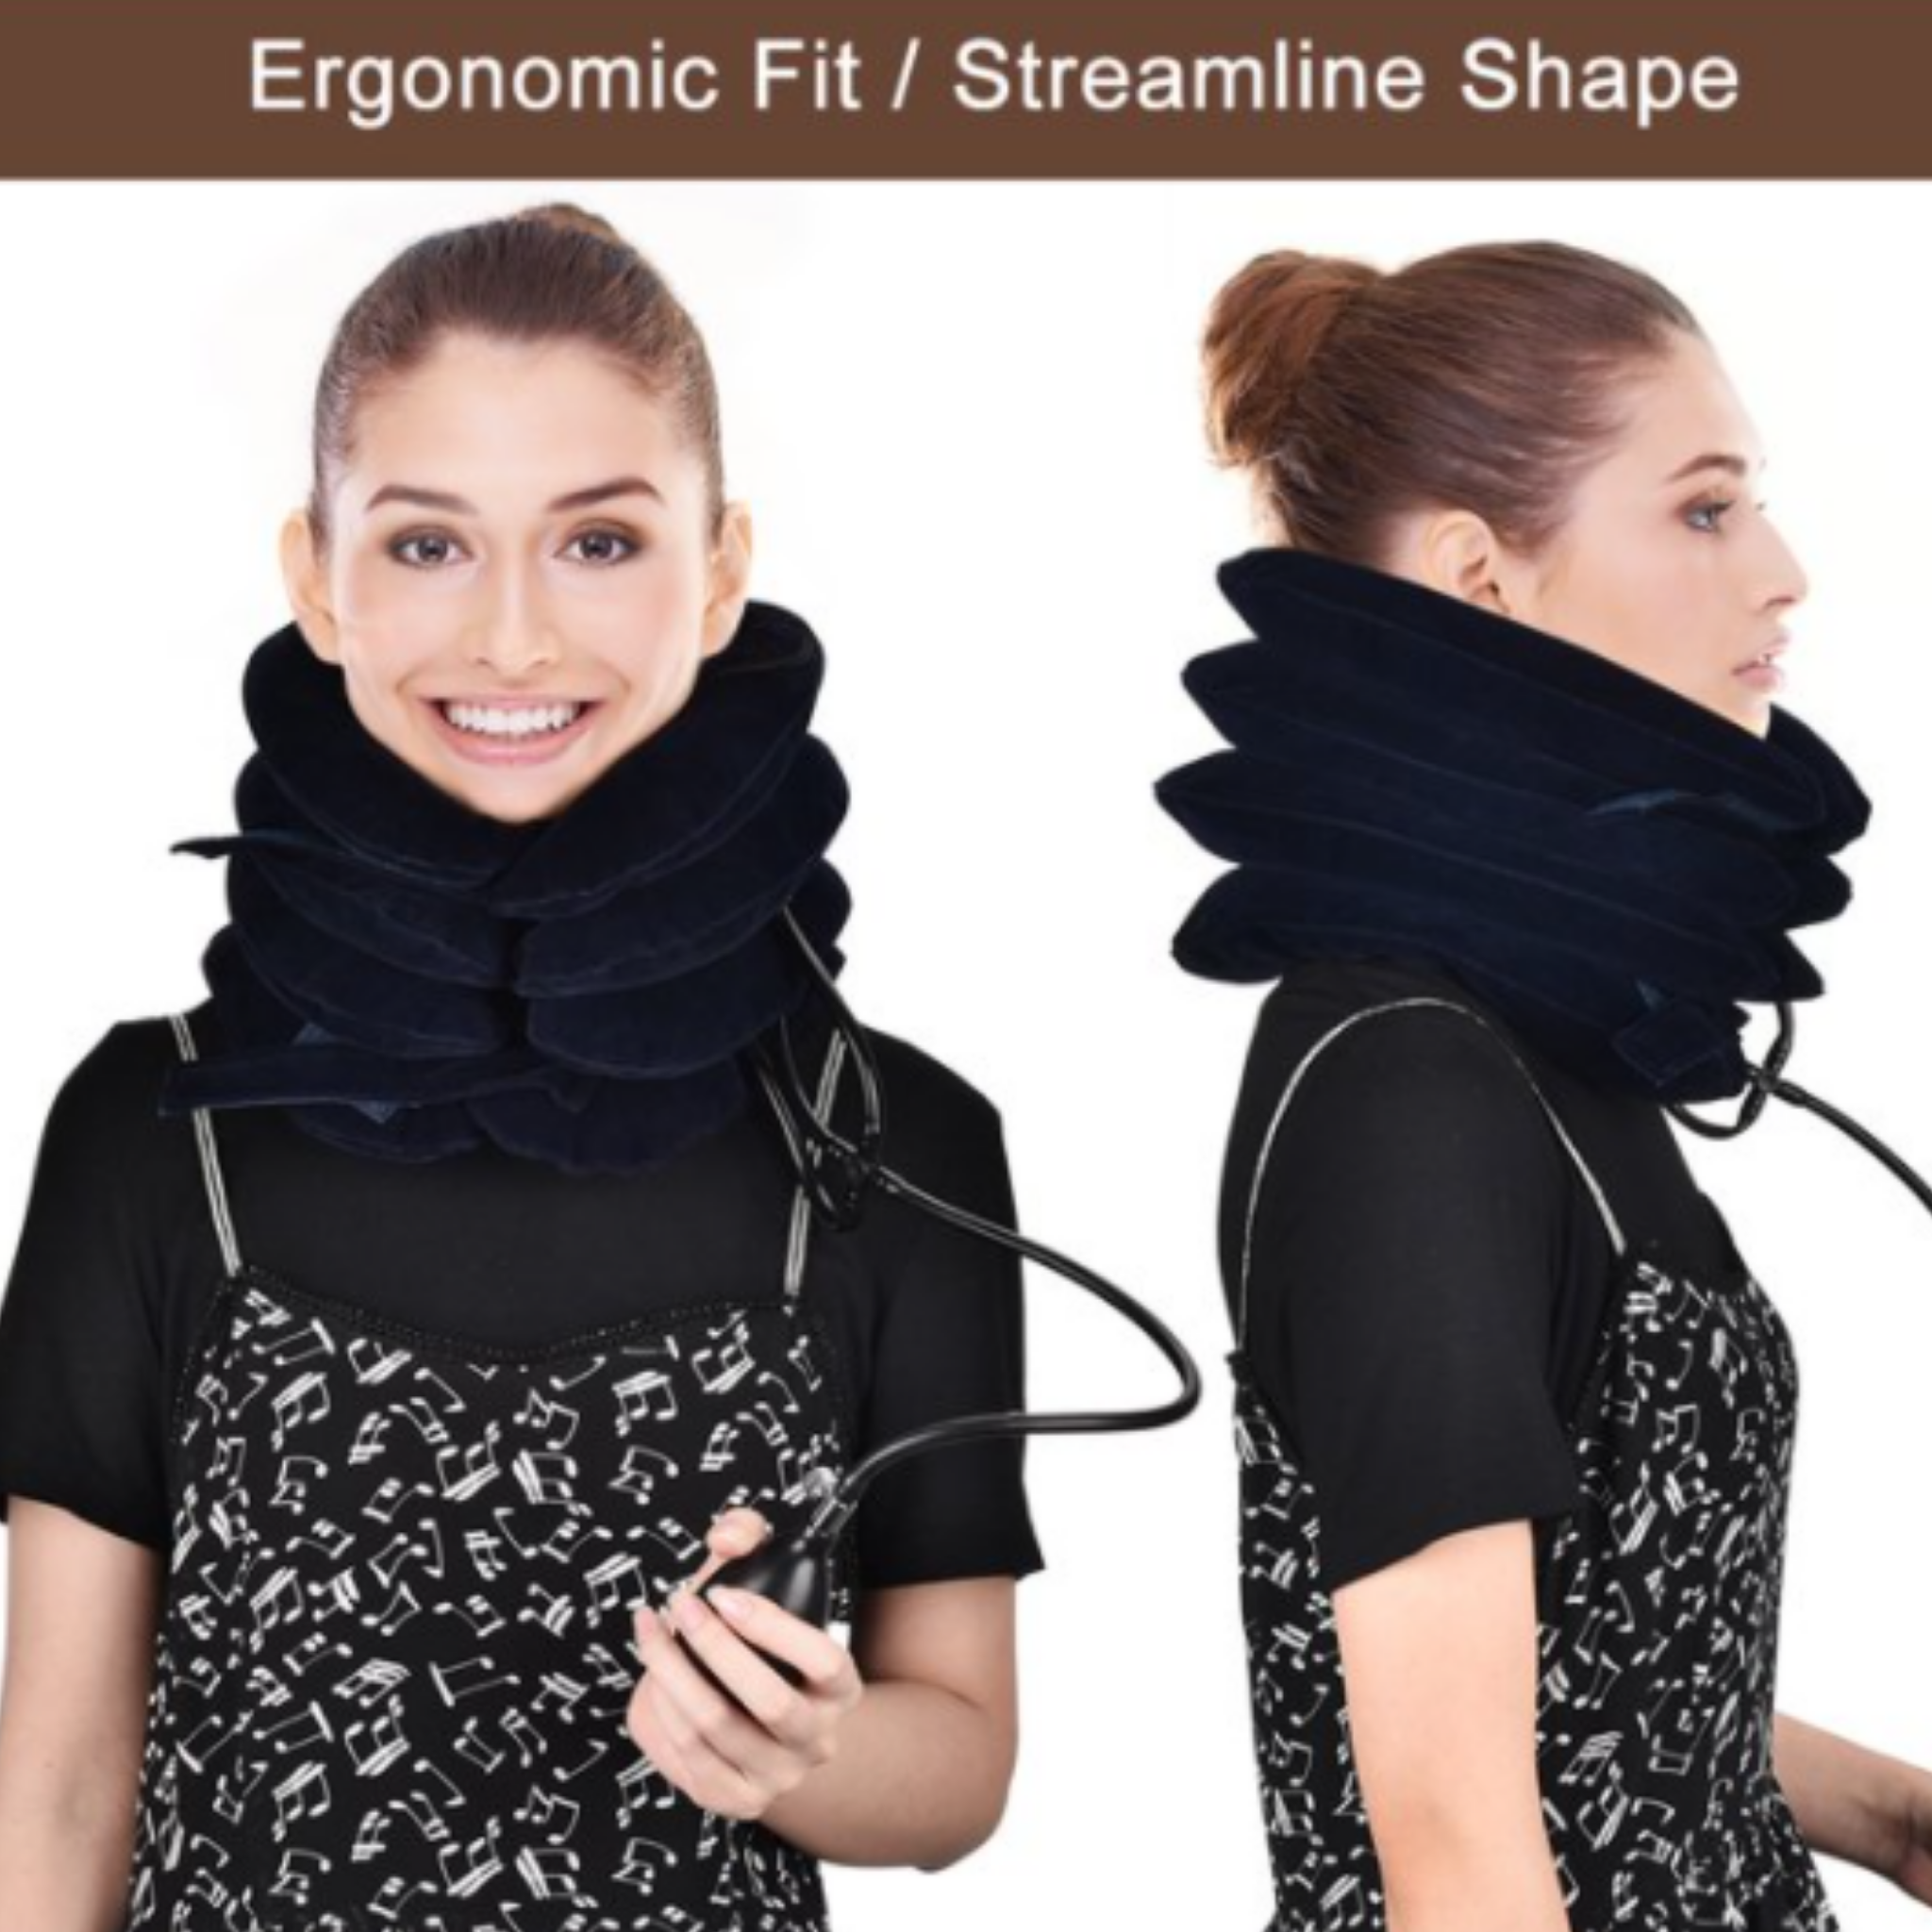 This inflatable neck pillow is perfect for if you have neck pain or your shoulder and neck feel stiff. The travel neck pillow makes you feel comfortable and non-pressurized. This travel pillow is your perfect companion for the office, train/ plane travel, home. This cervical neck traction device is easy to inflate with the hand pump. Although neck pillow for traveling purposes, yet it can be used at home also.